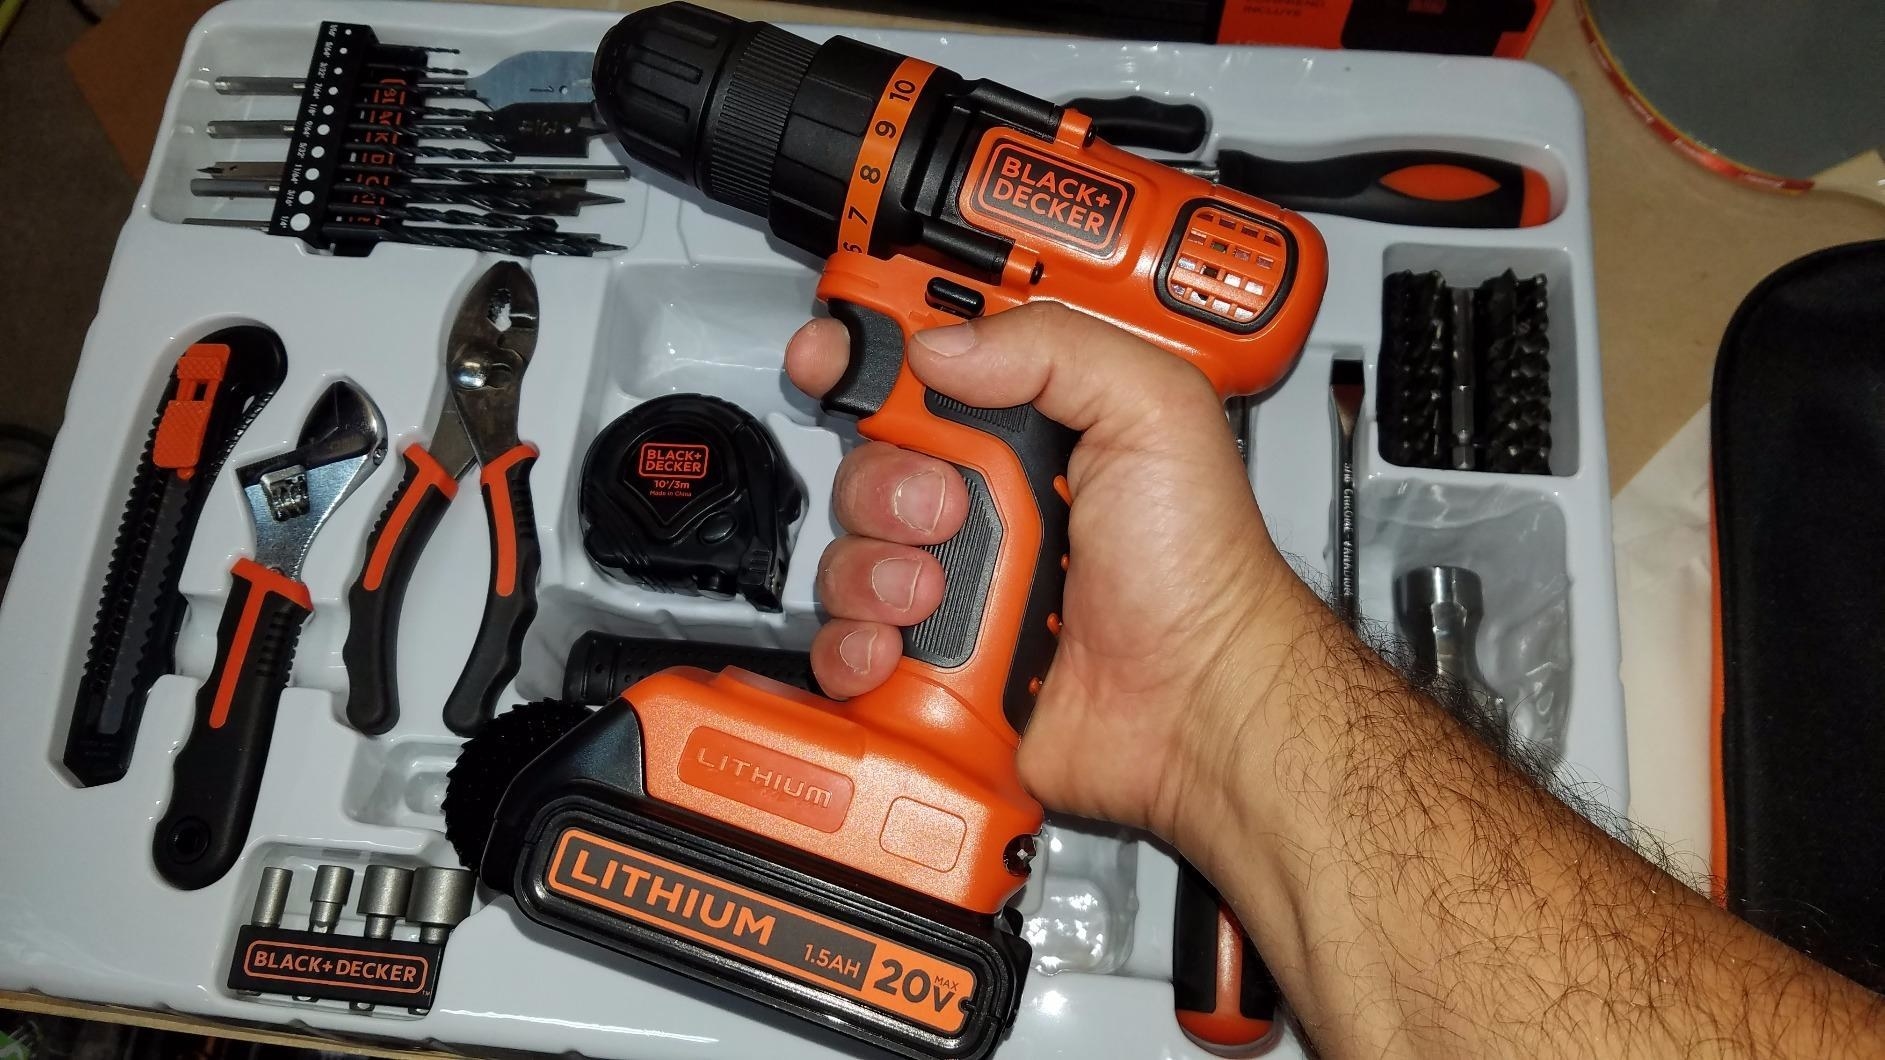 A reviewer showing his tool kit while holding the 